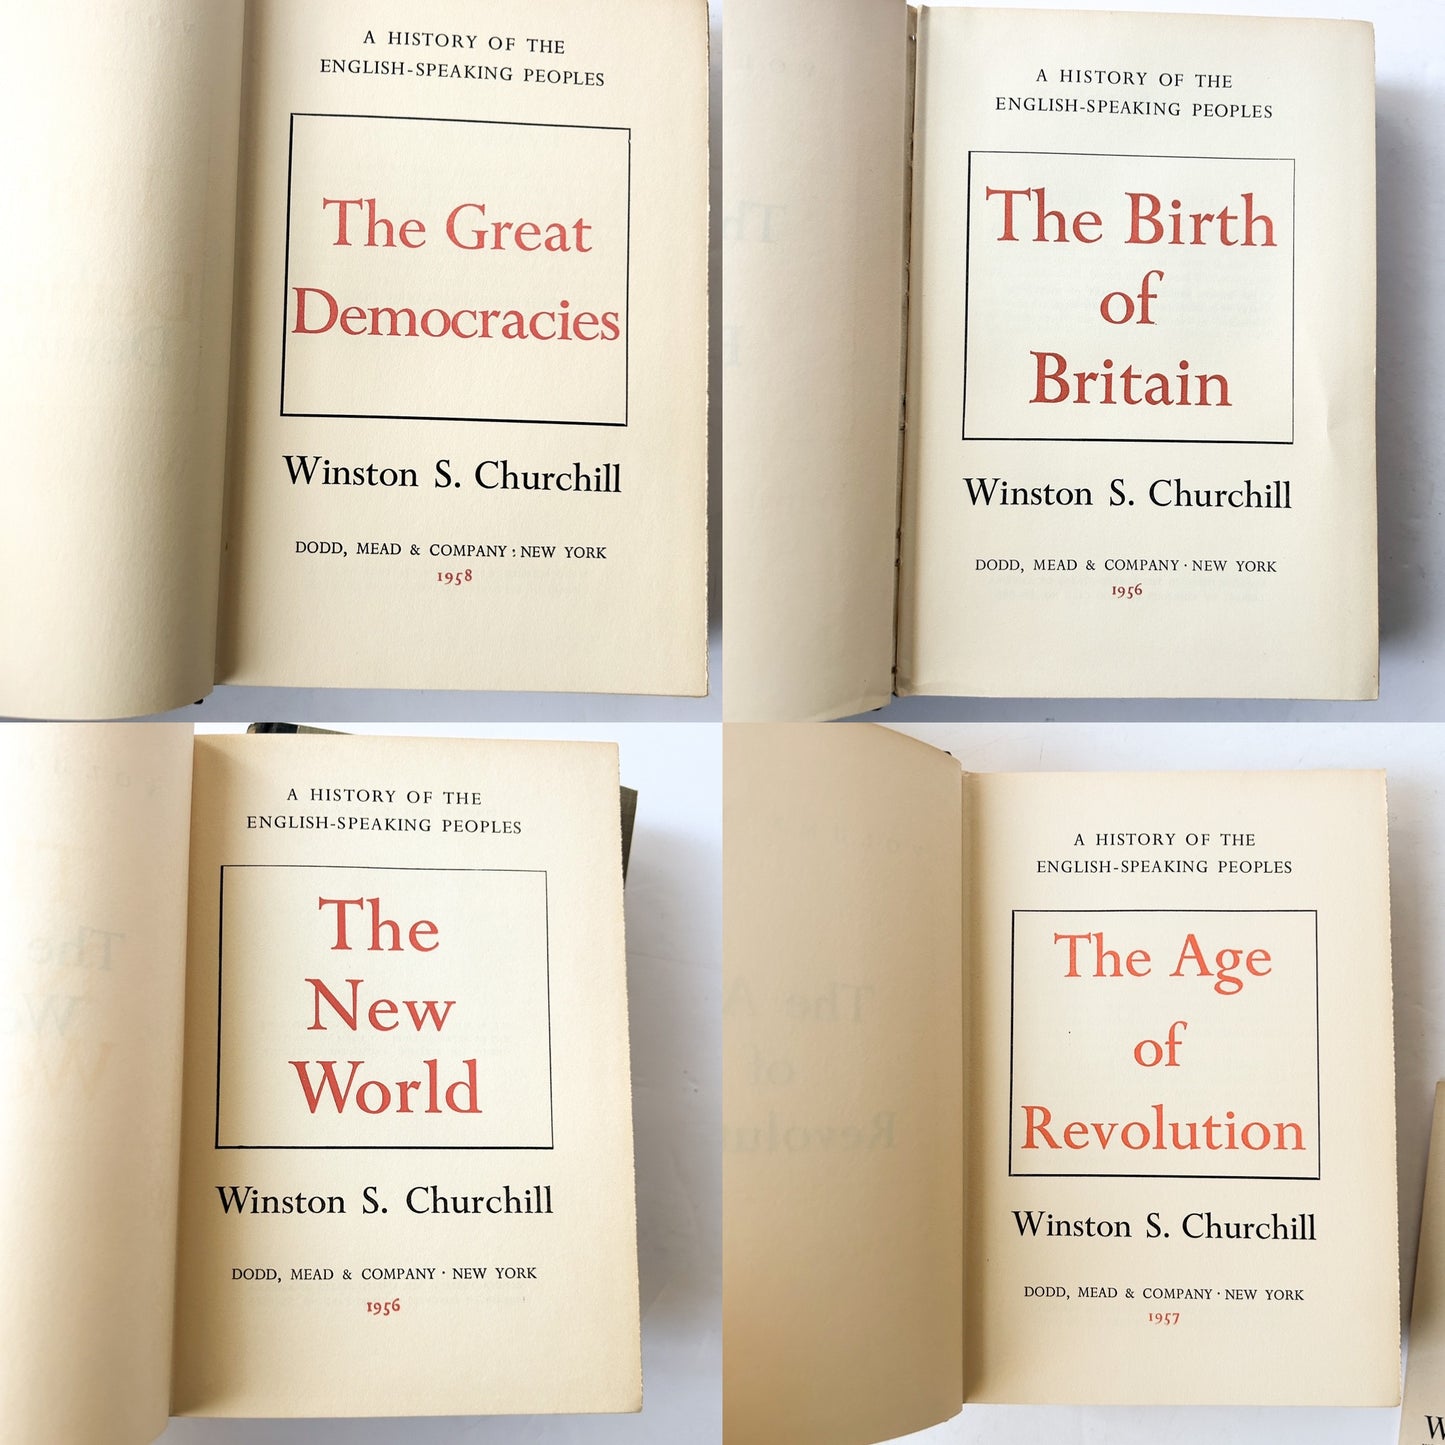 Vintage Winston S. Churchill, A History of the English Speaking Peoples, 4 Volume Set, includes first edition of The Age of Revolution